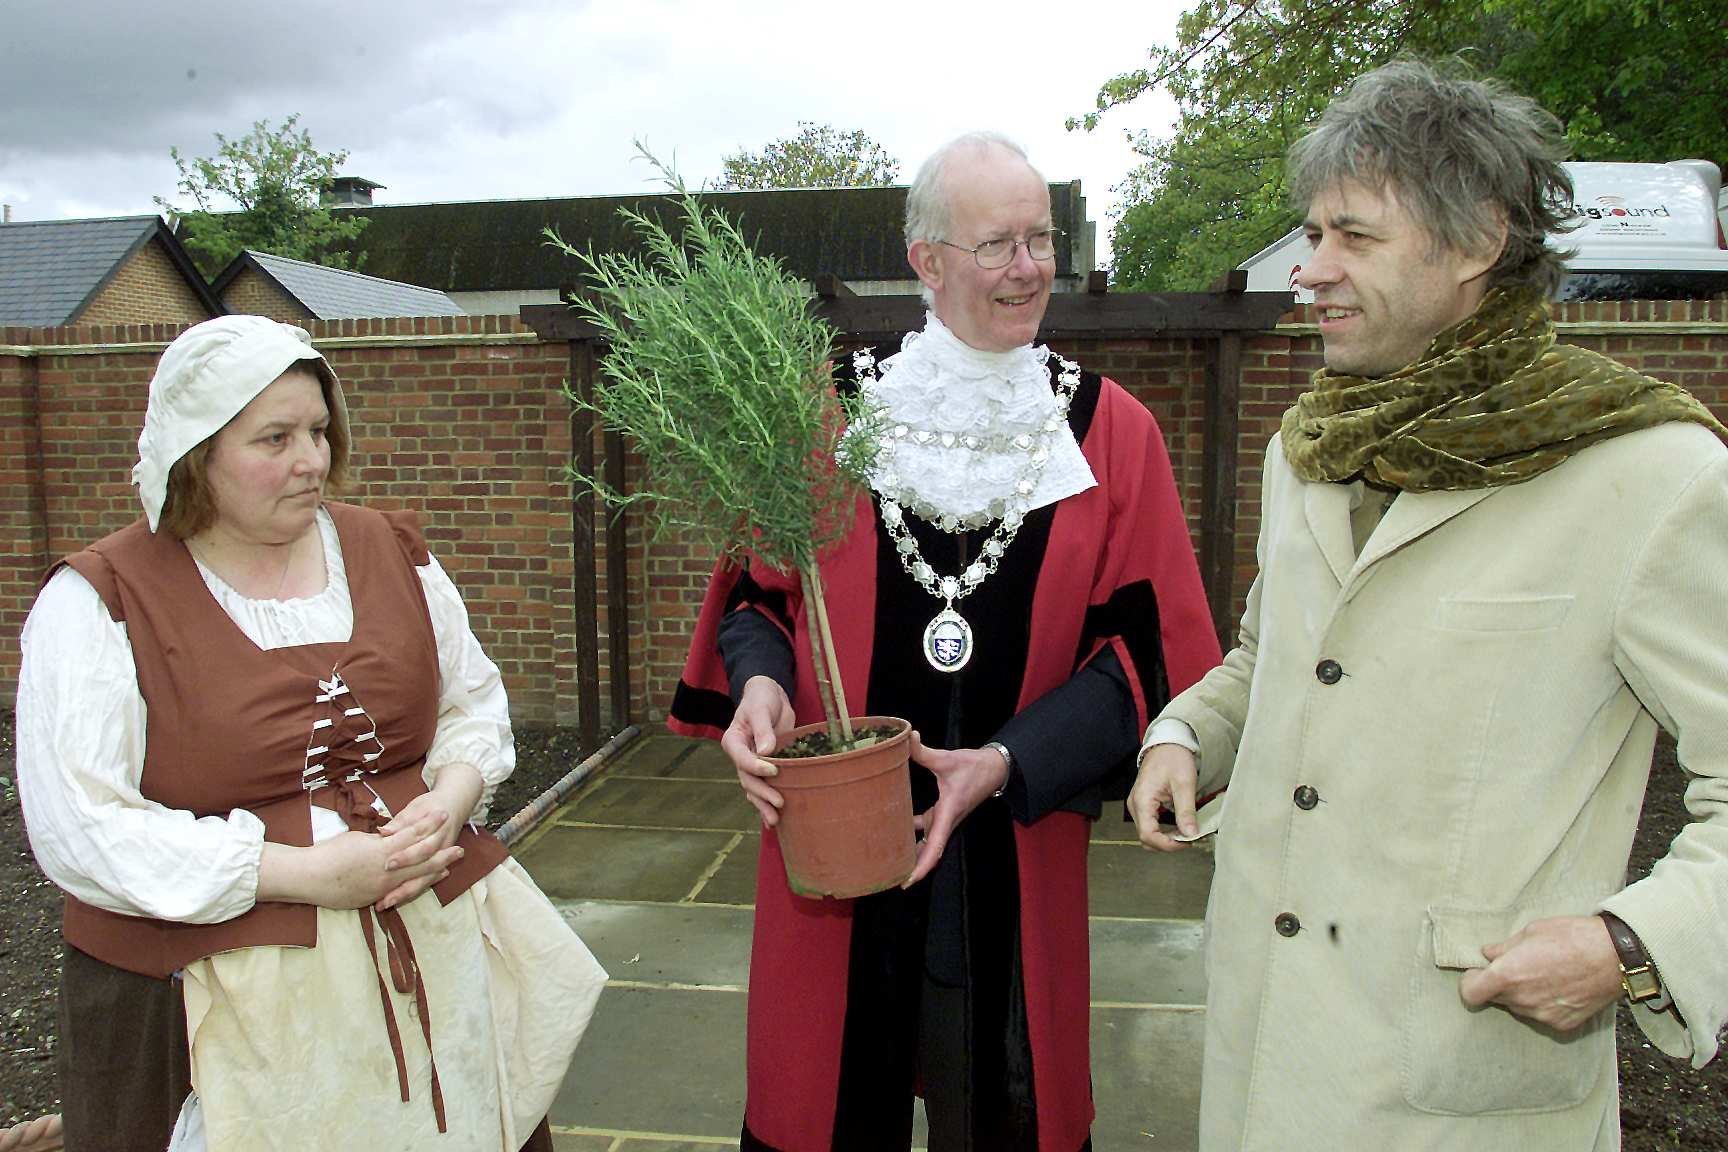 Bob Geldof in Wimborne on the day of his concert at the Tivoli Theatre: Wimborne Mayor Anthony Oliver asks Bob Geldof to plant a rosemary bush in the new Physic garden